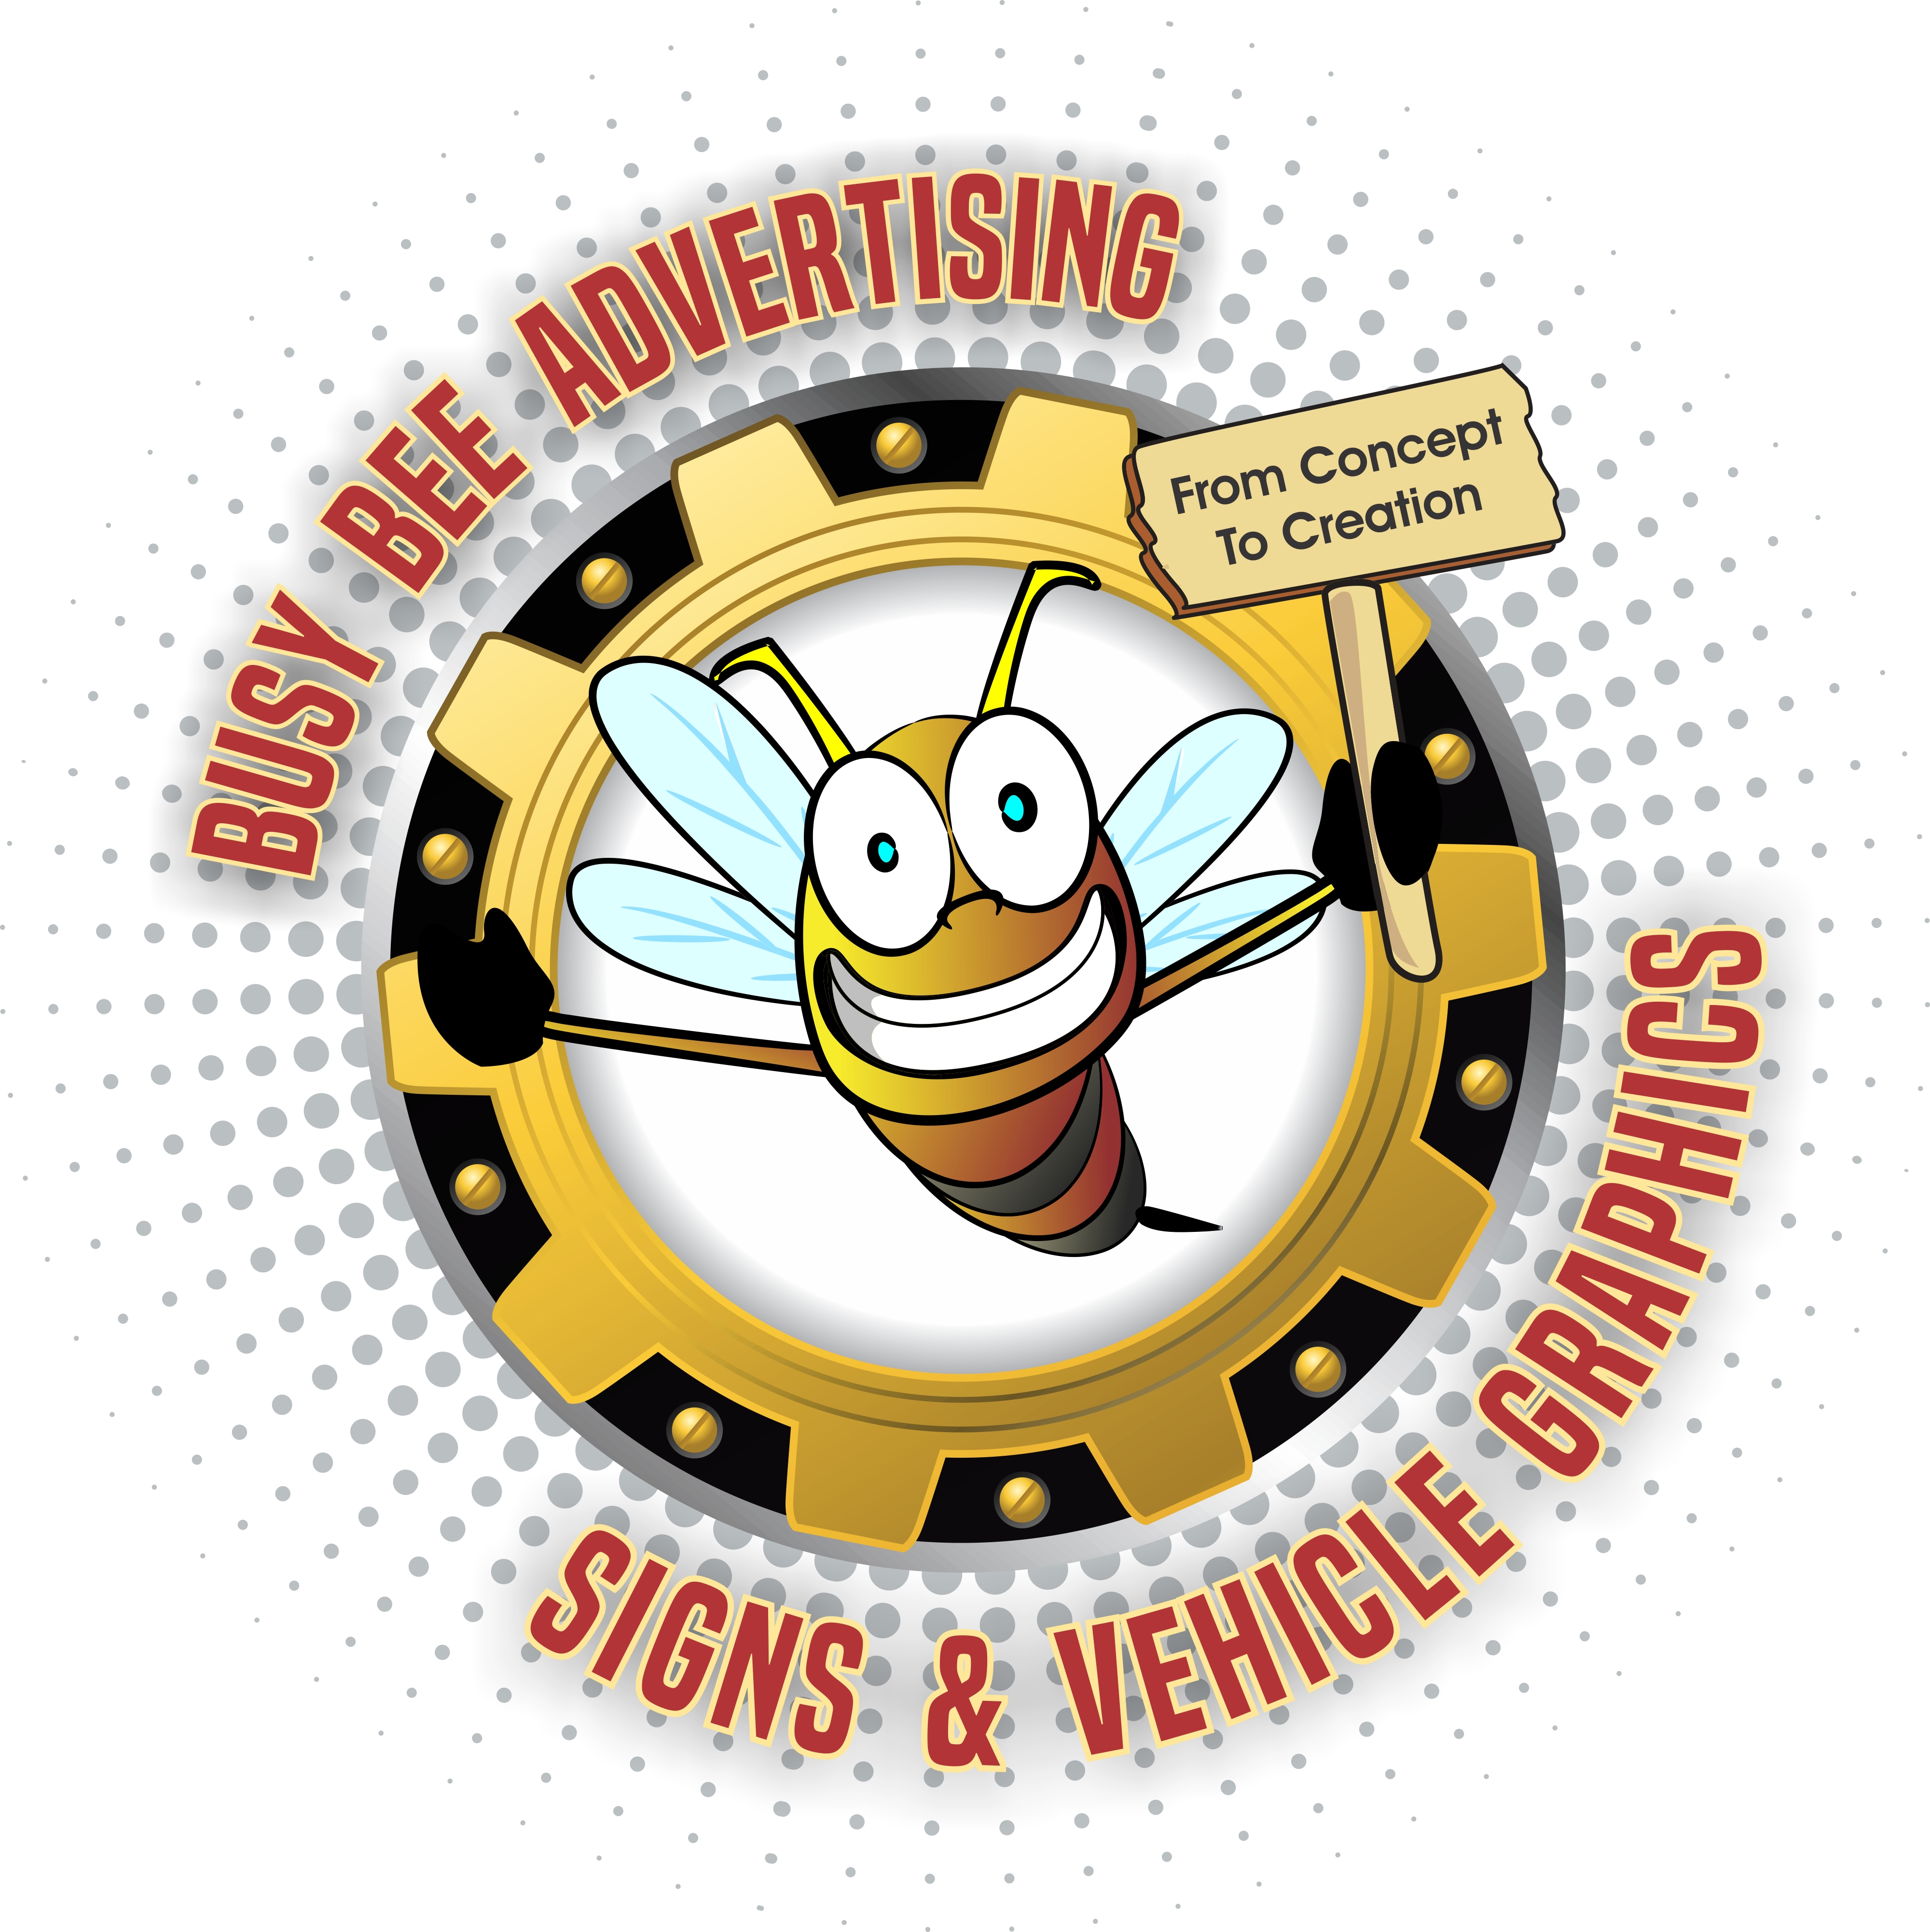 Busy Bee Advertising - Advertising (4000x4004)